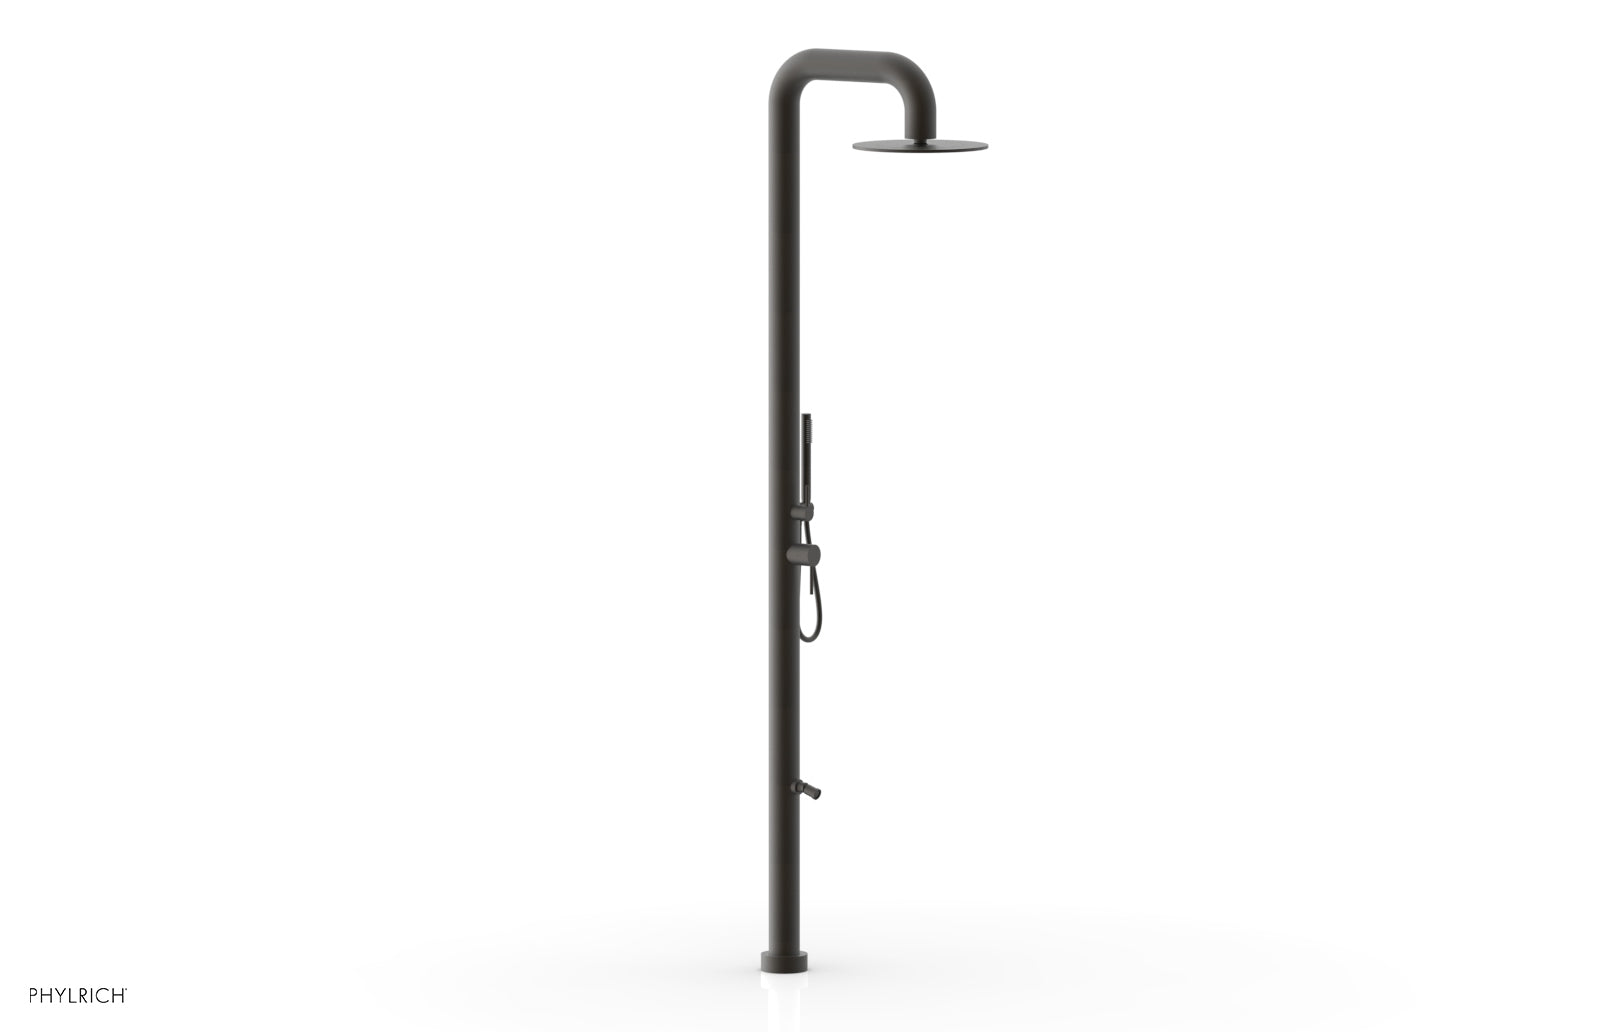 Phylrich OUTDOOR SHOWER Pressure Balance Shower with 12" Rain Head, Hand Shower and Foot Wash